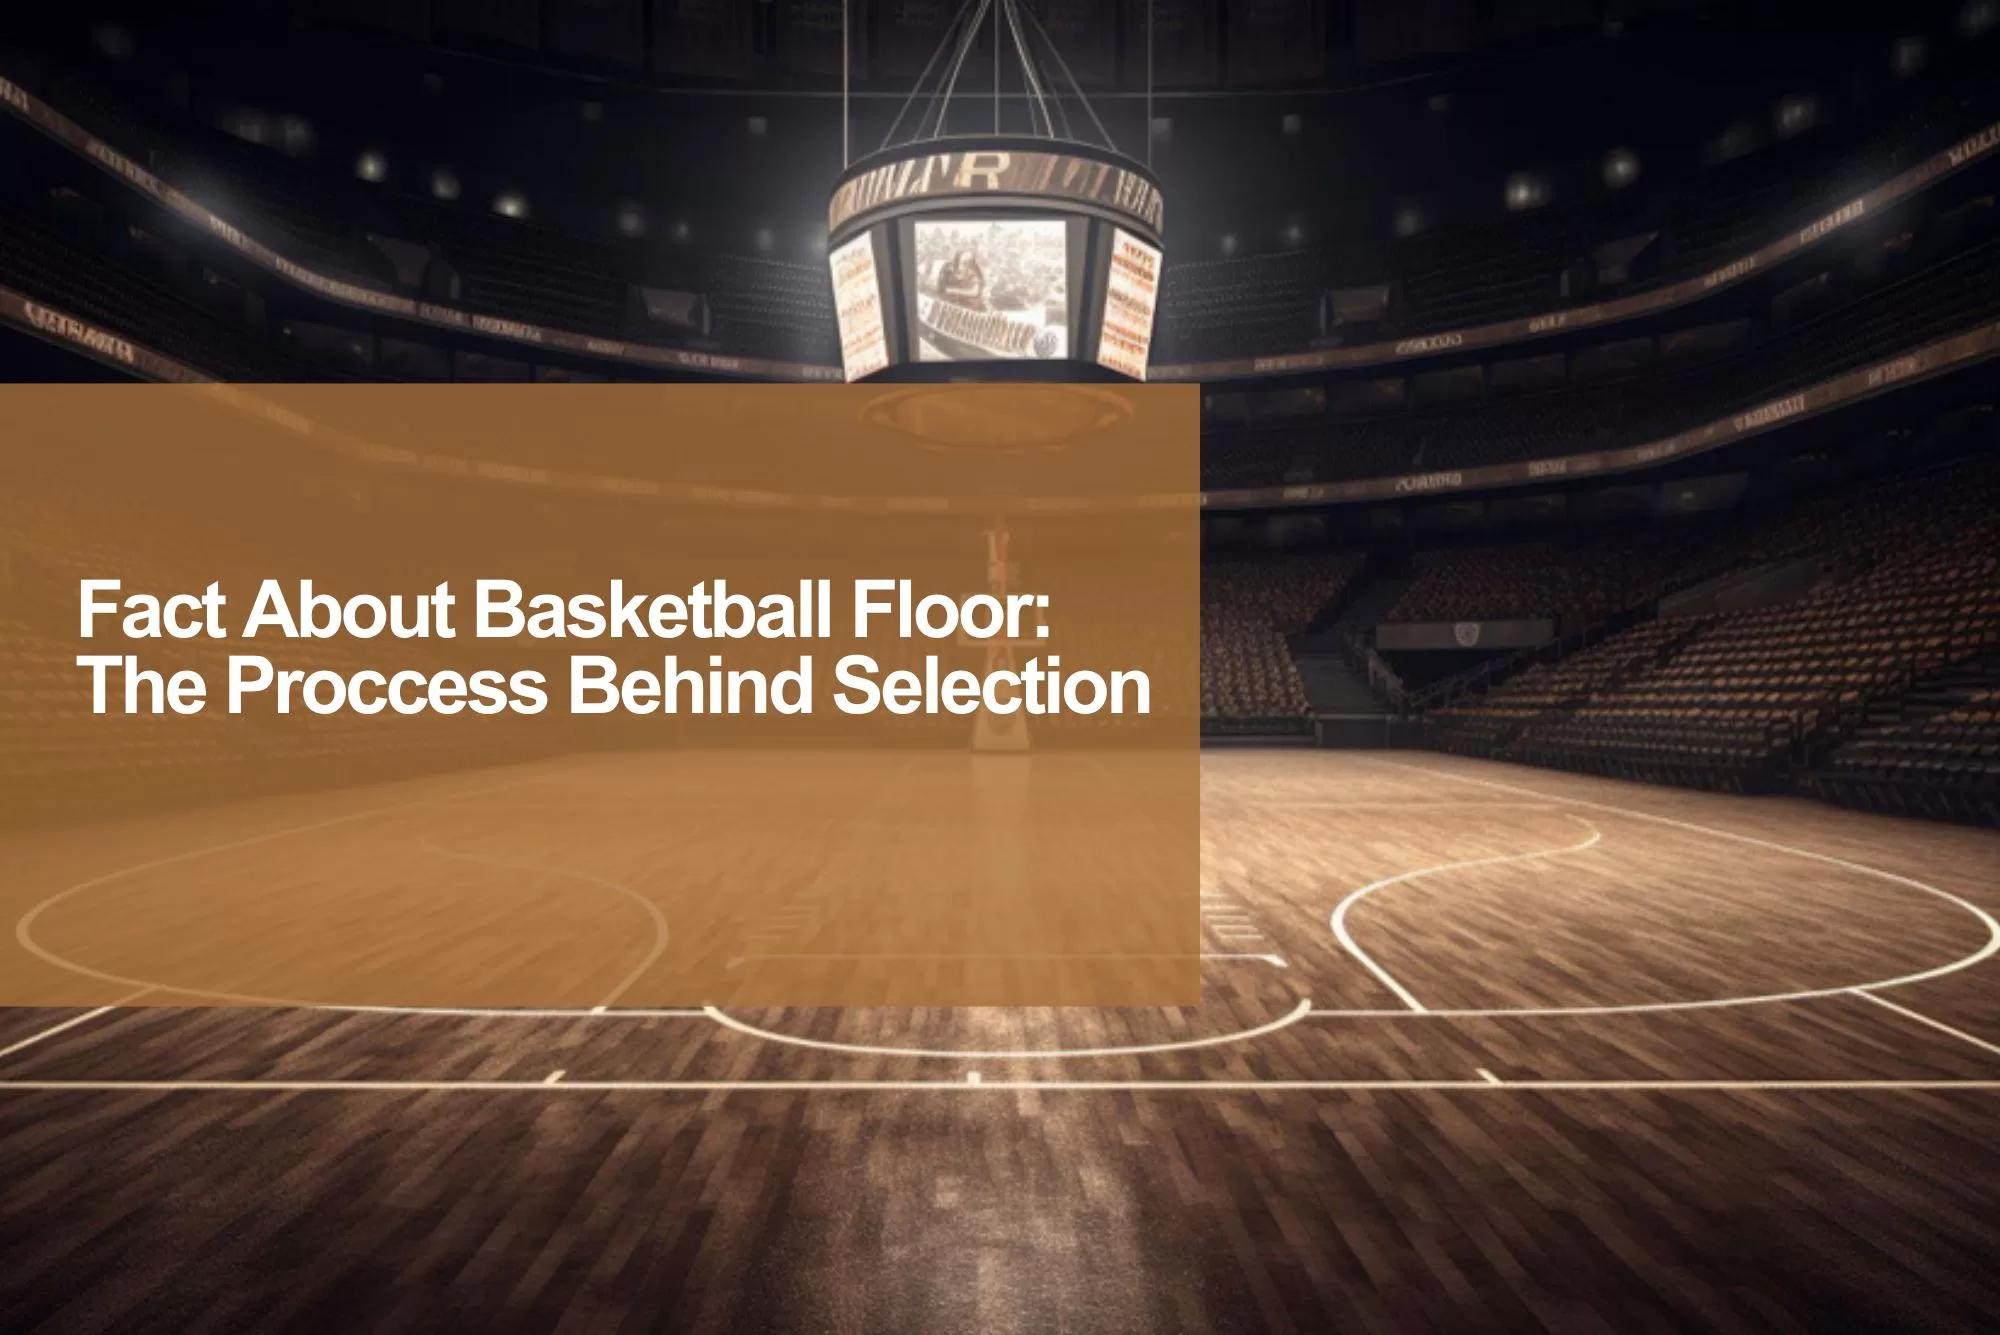 Fact About Basketball Floor: The Proccess Behind Selection